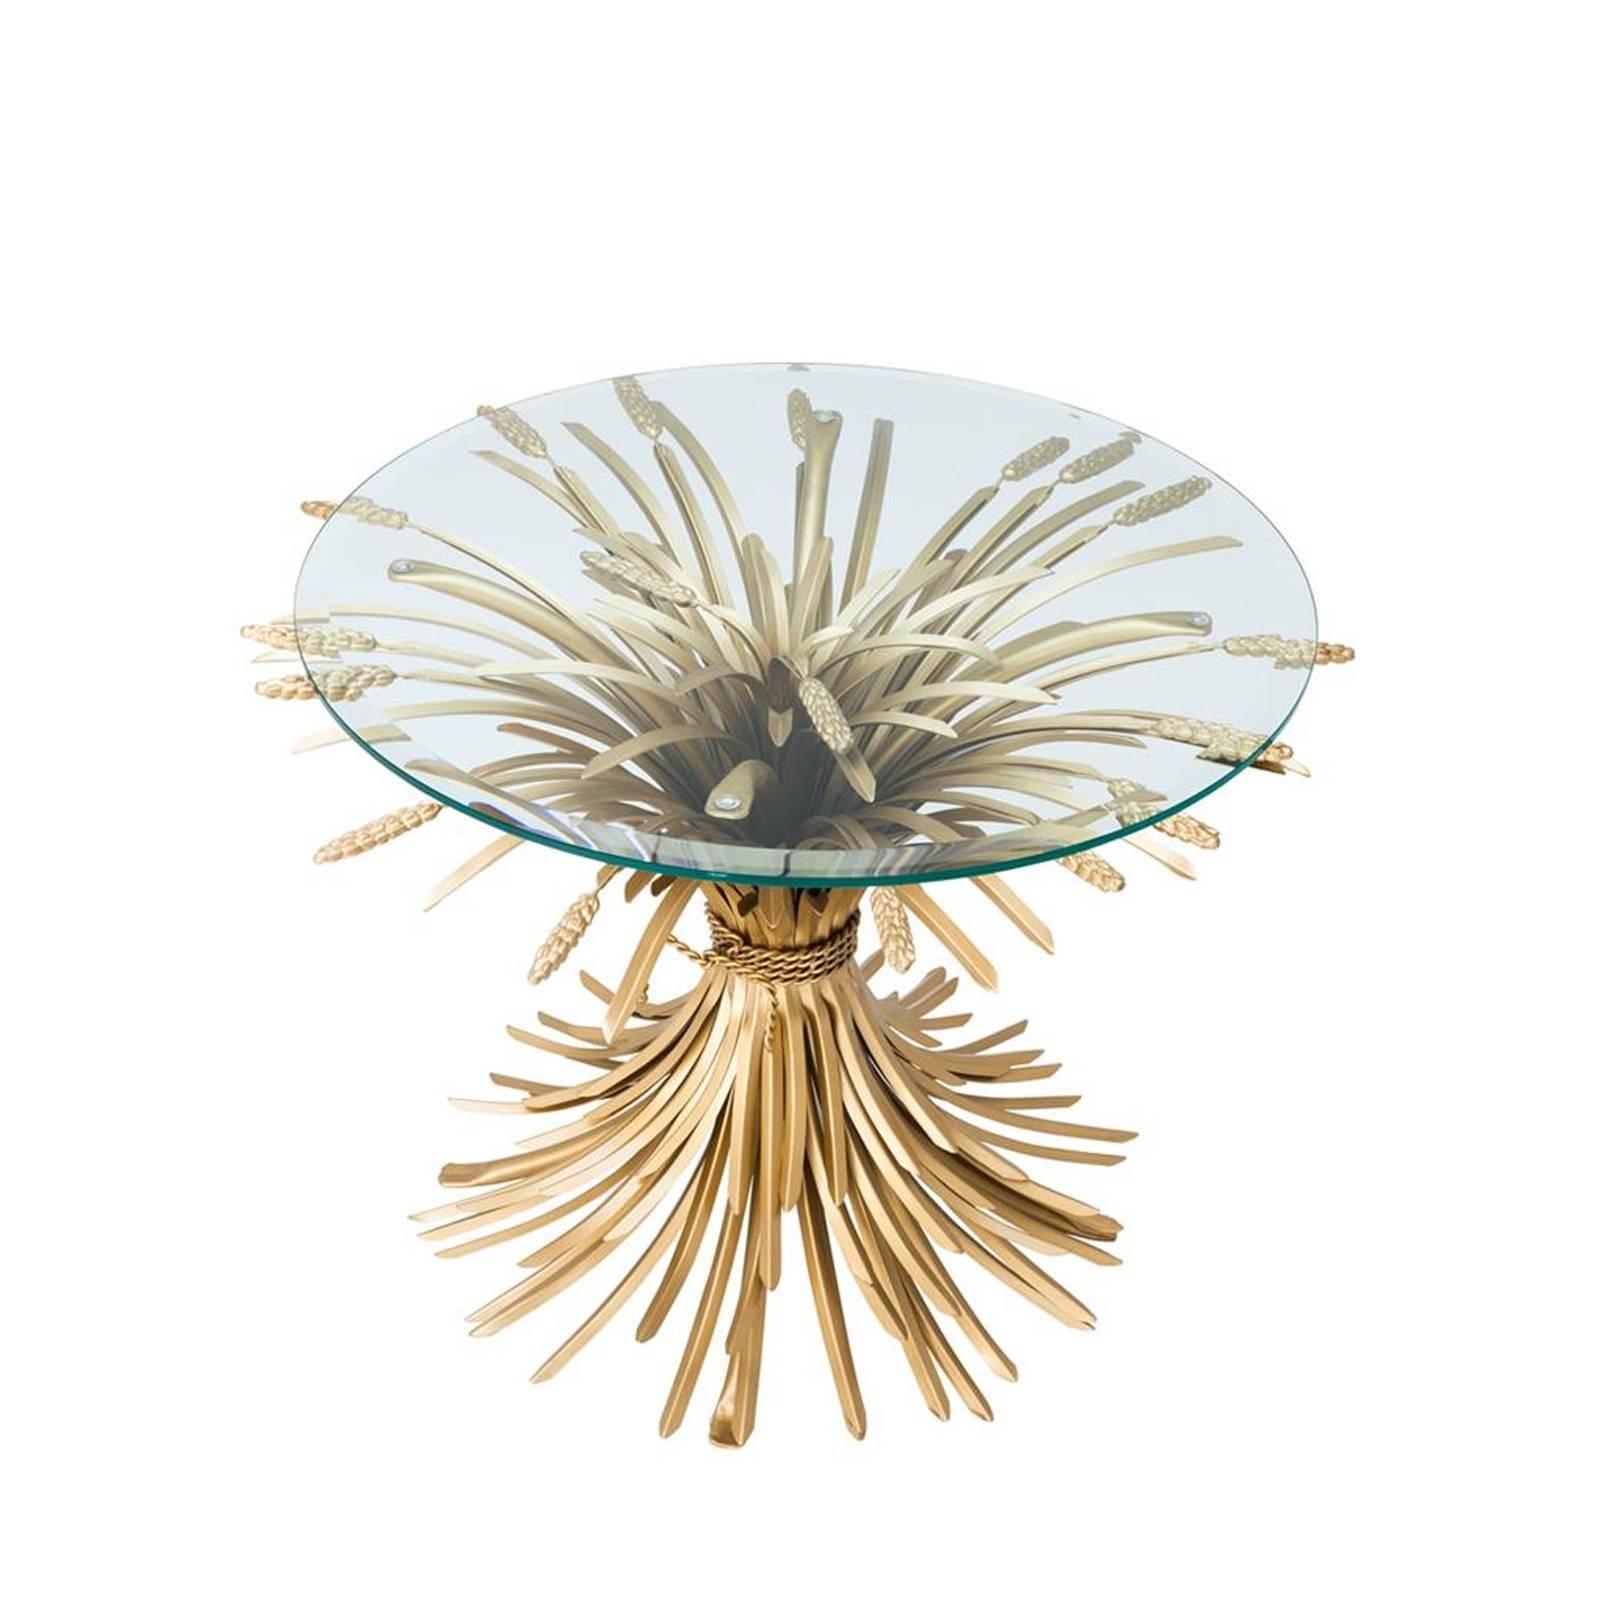 Side table wheat sheaf in antique gold finish
with bevelled clear glass top. Elegant and subtle
piece for living. Measures: Glass top Ø70cm. Price: 1990,00€.
Also available in coffee table wheat sheaf,
Measures: Ø90 x H43, glass top Ø90cm.